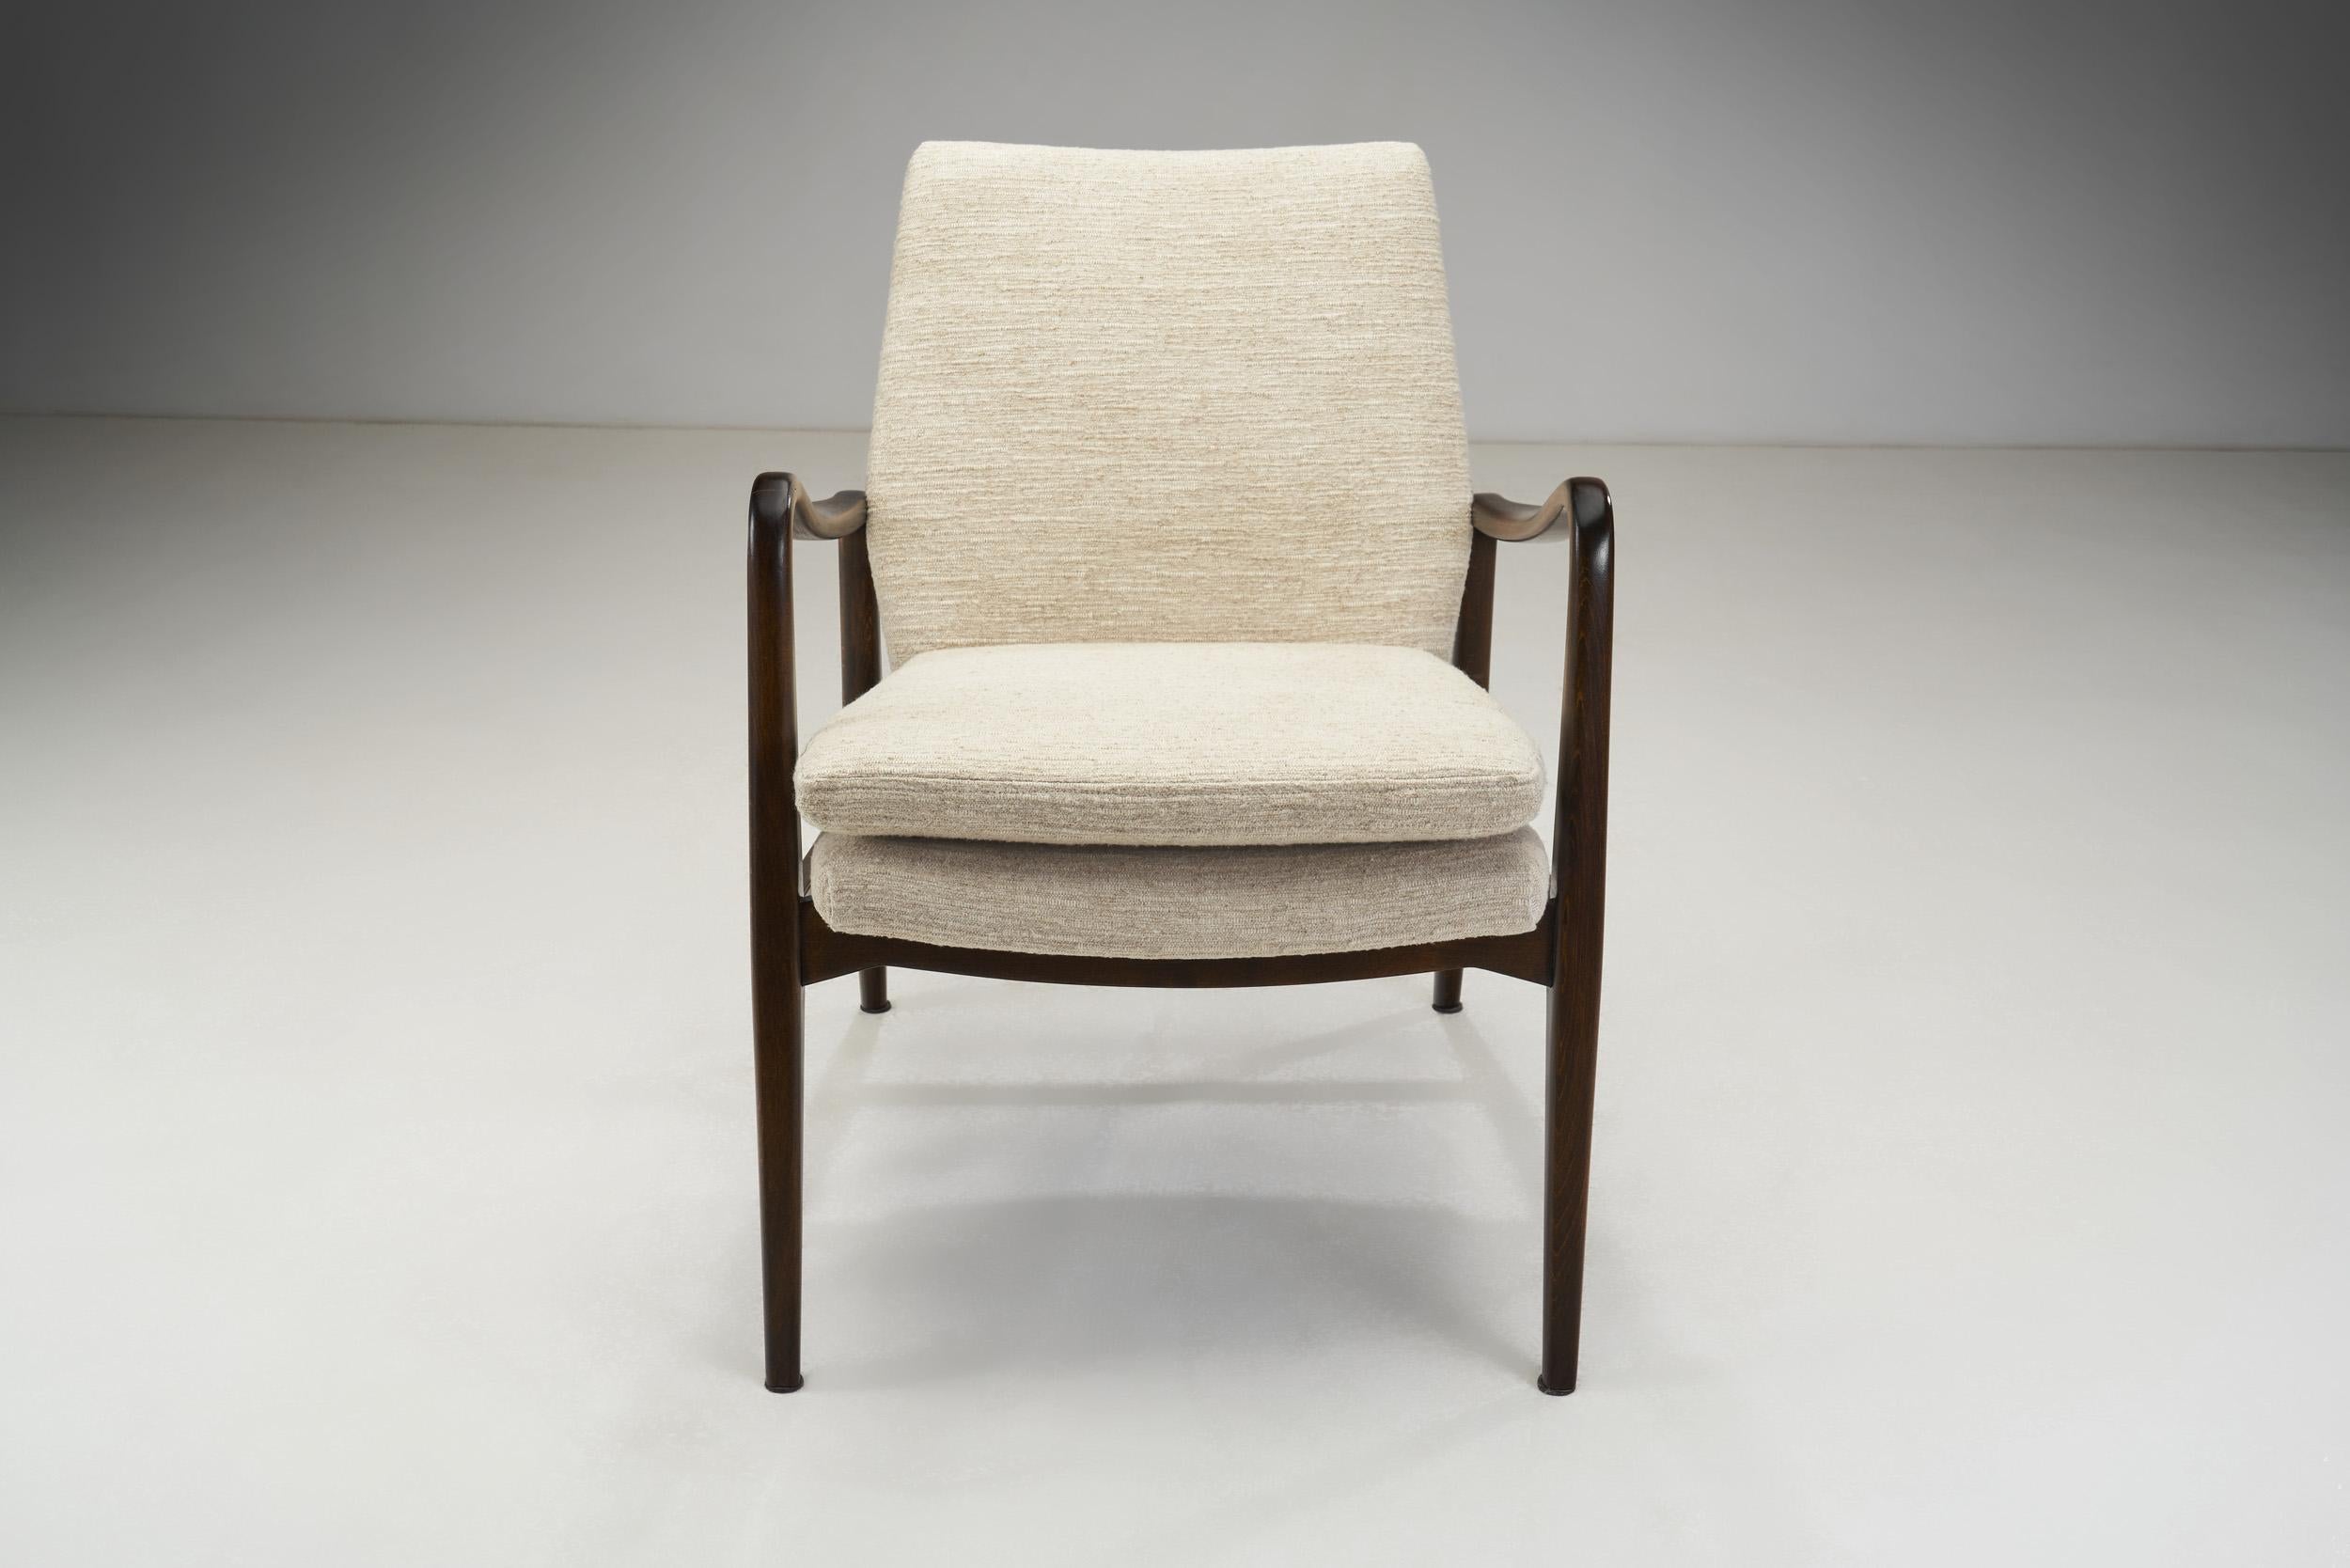 Fabric Swedish Modern Upholstered Armchair by Axel Larsson 'Attr.', Sweden, Ca 1950s For Sale